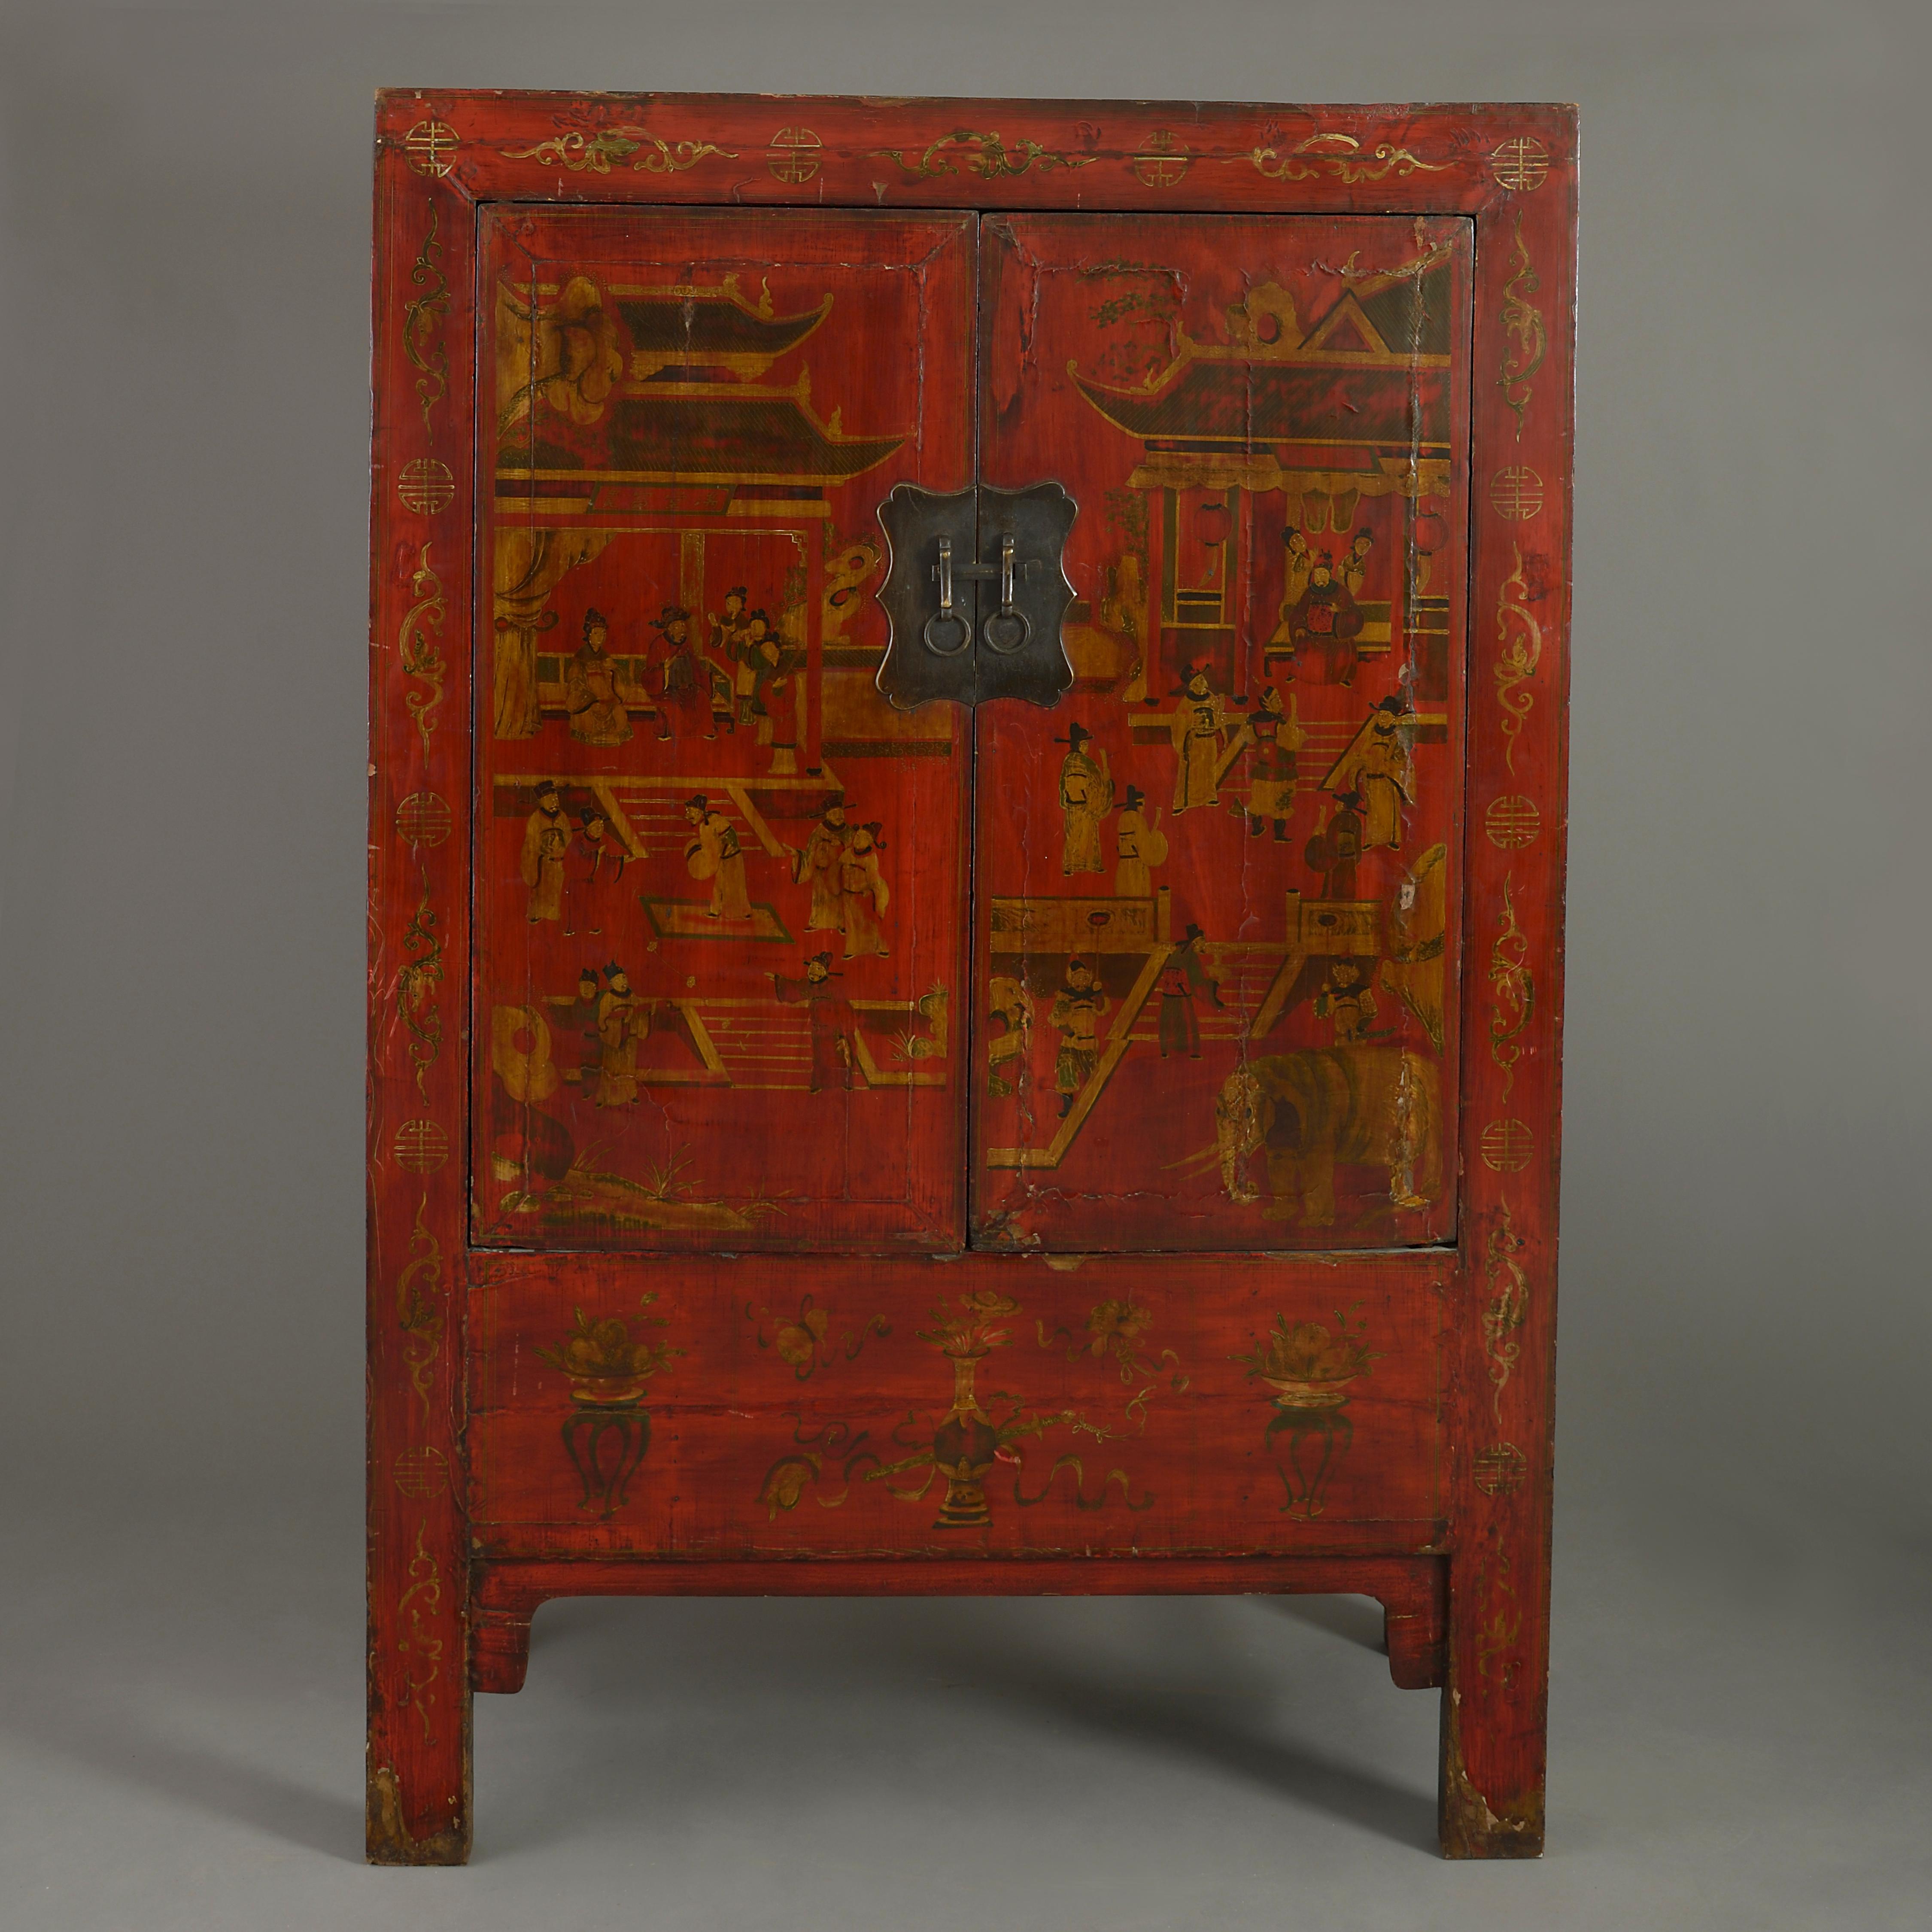 A tall early 20th century red lacquer cabinet, having two doors opening to reveal shelves, raised upon stile feet, with figurative decoration throughout.

    